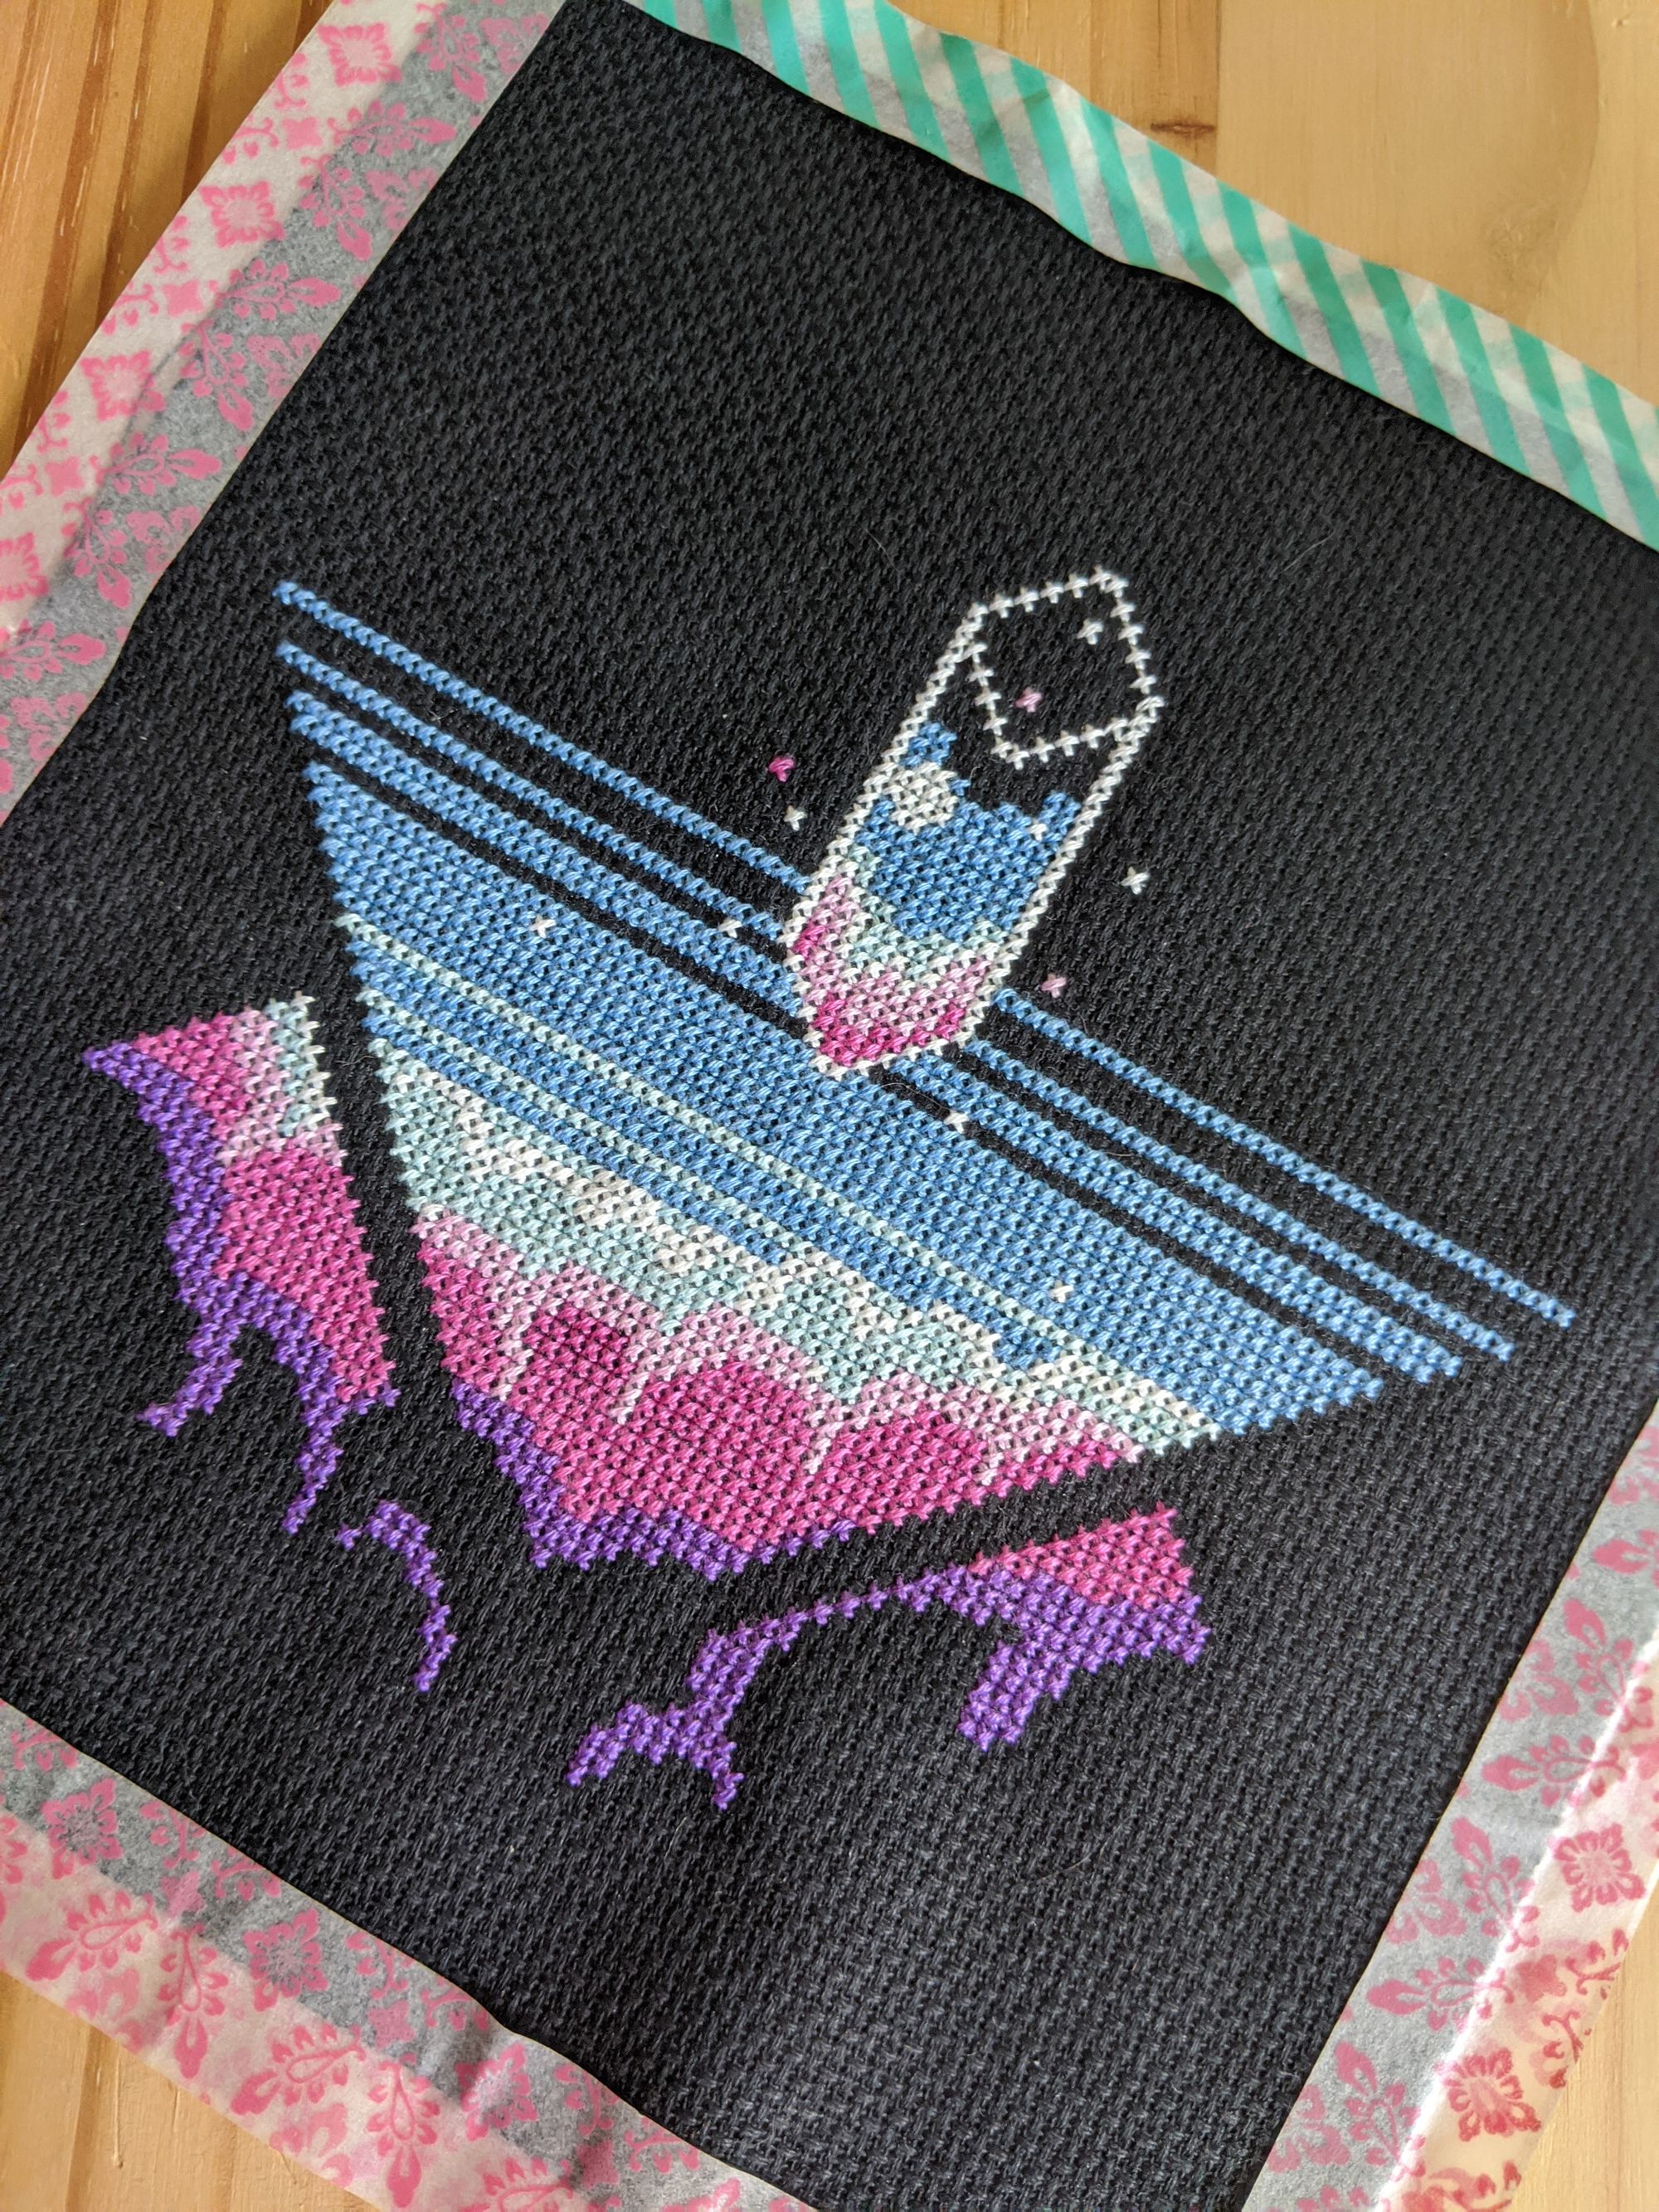 A cross stitch piece with a variety of blues, pinks and purples. It's an abstract piece with the beginnings of what looks like clouds at the bottom.